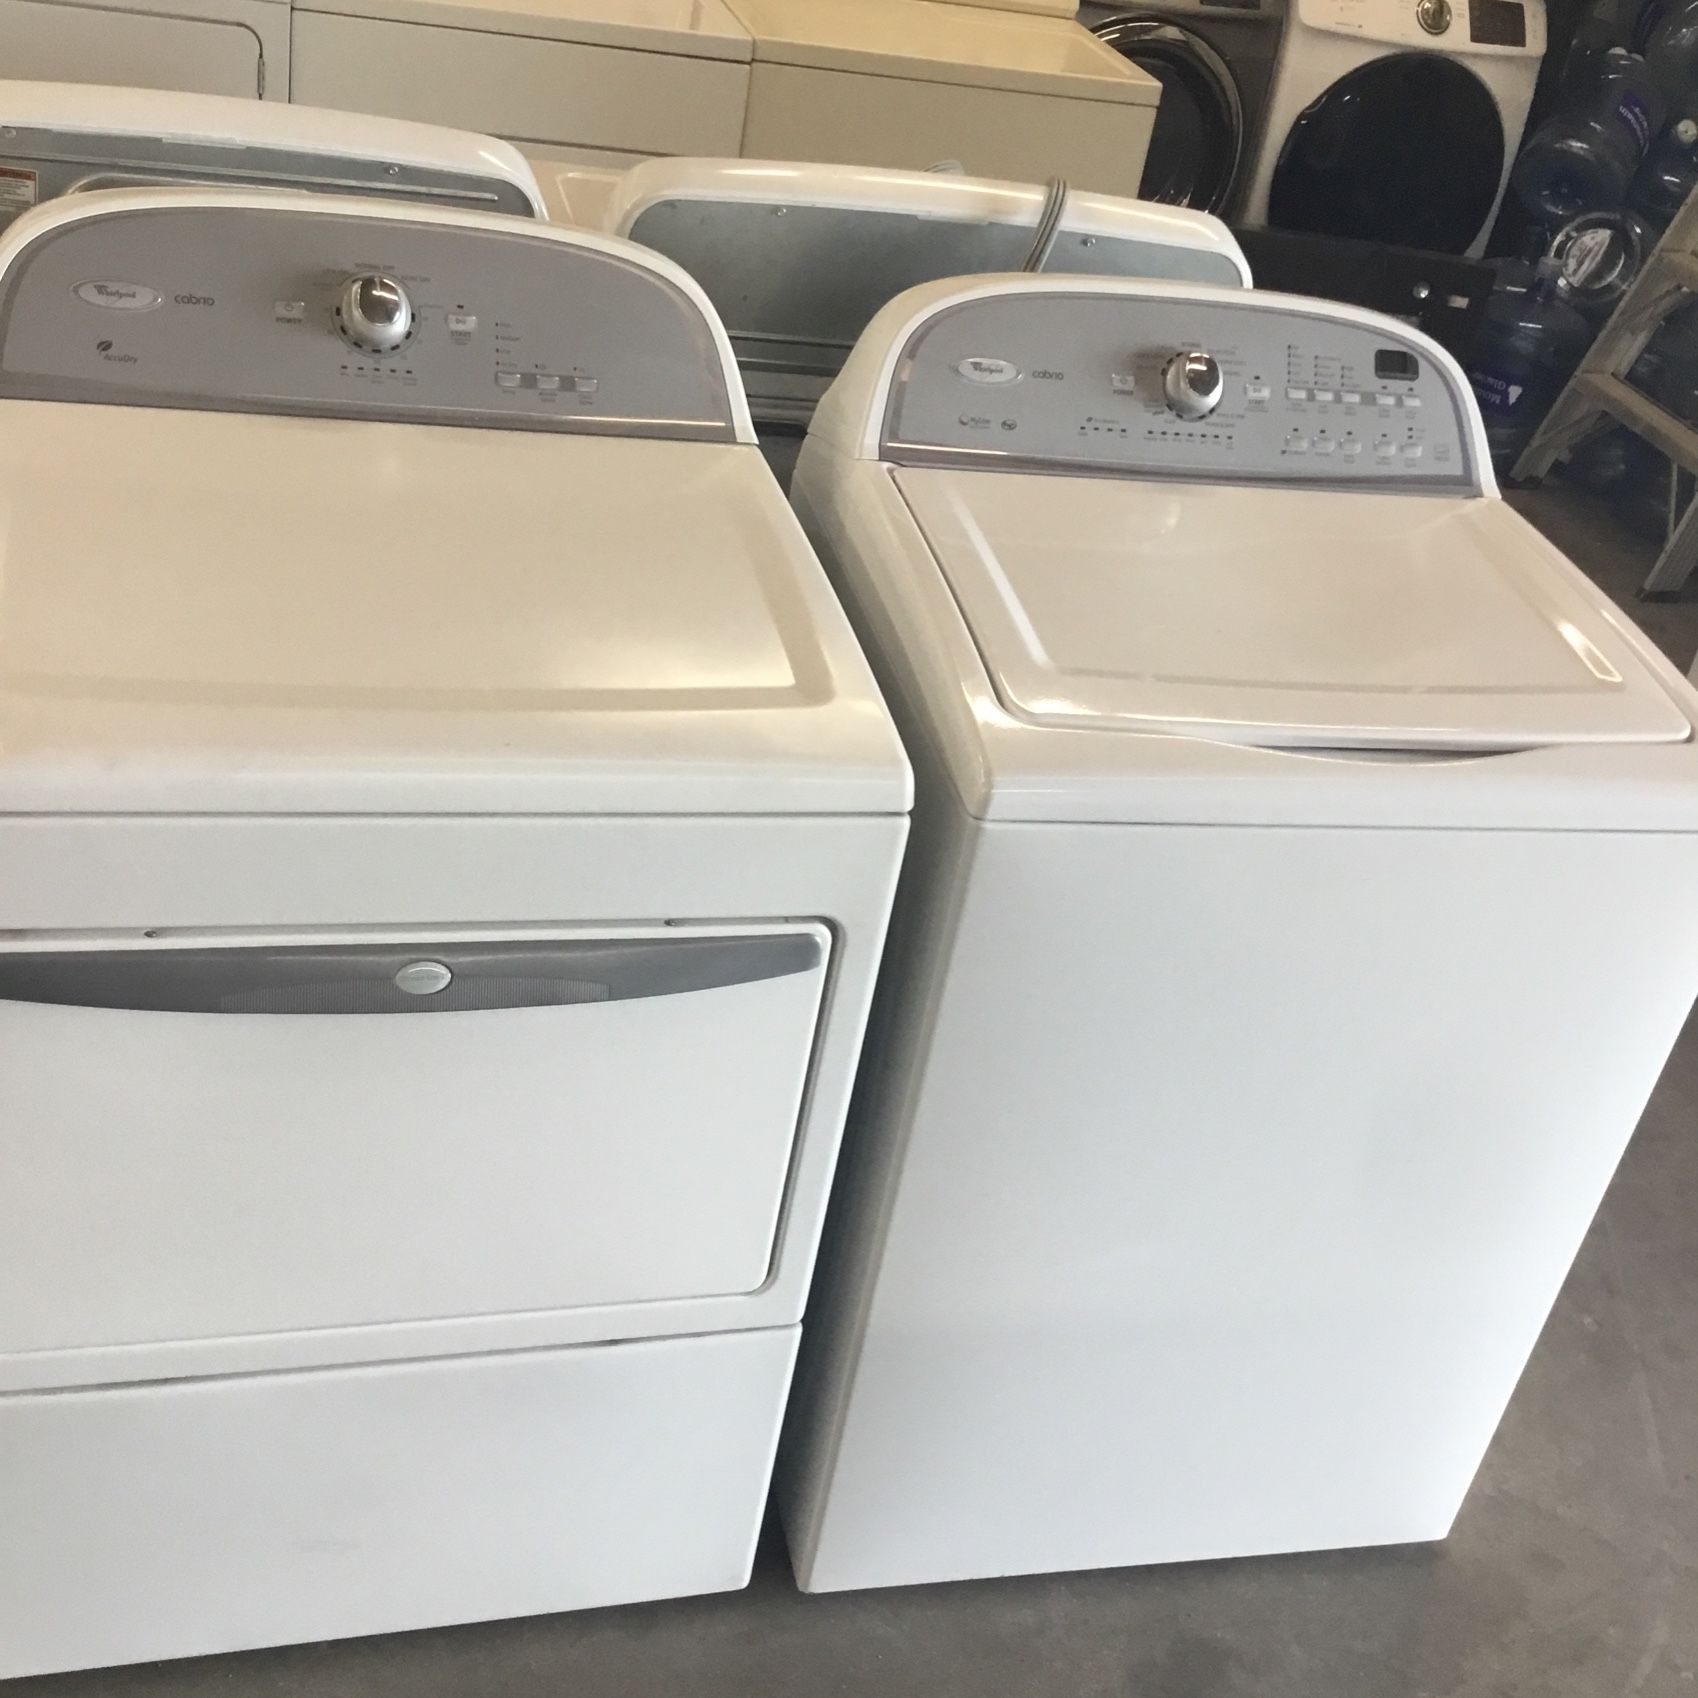 Whirlpool Cabrio Washer And Dryer Used for Sale in Indianapolis, IN -  OfferUp